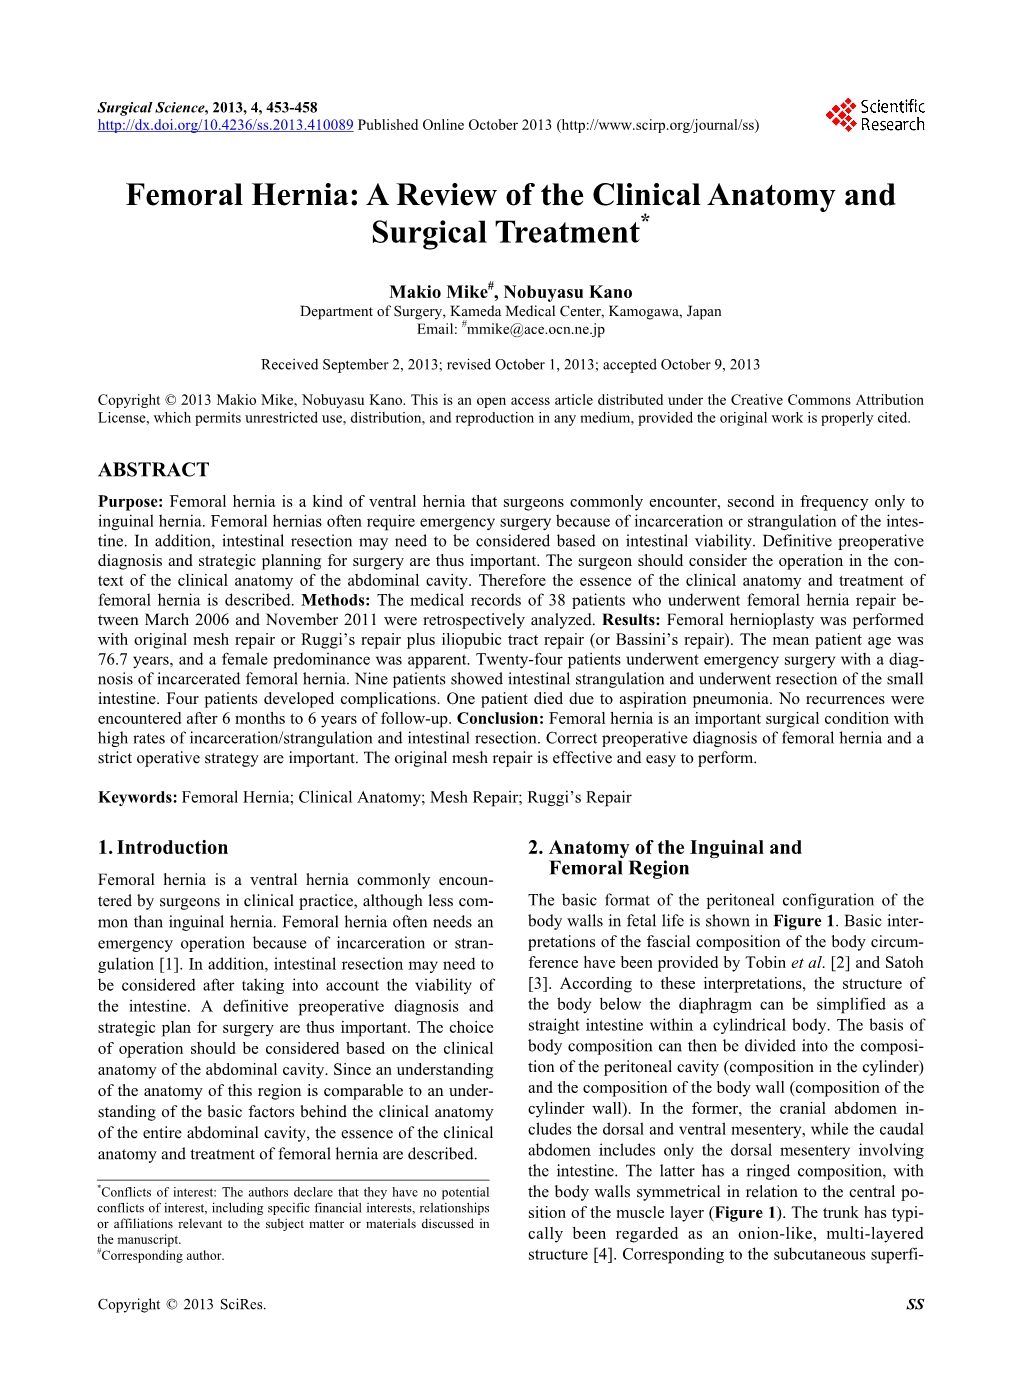 Femoral Hernia: a Review of the Clinical Anatomy and Surgical Treatment*